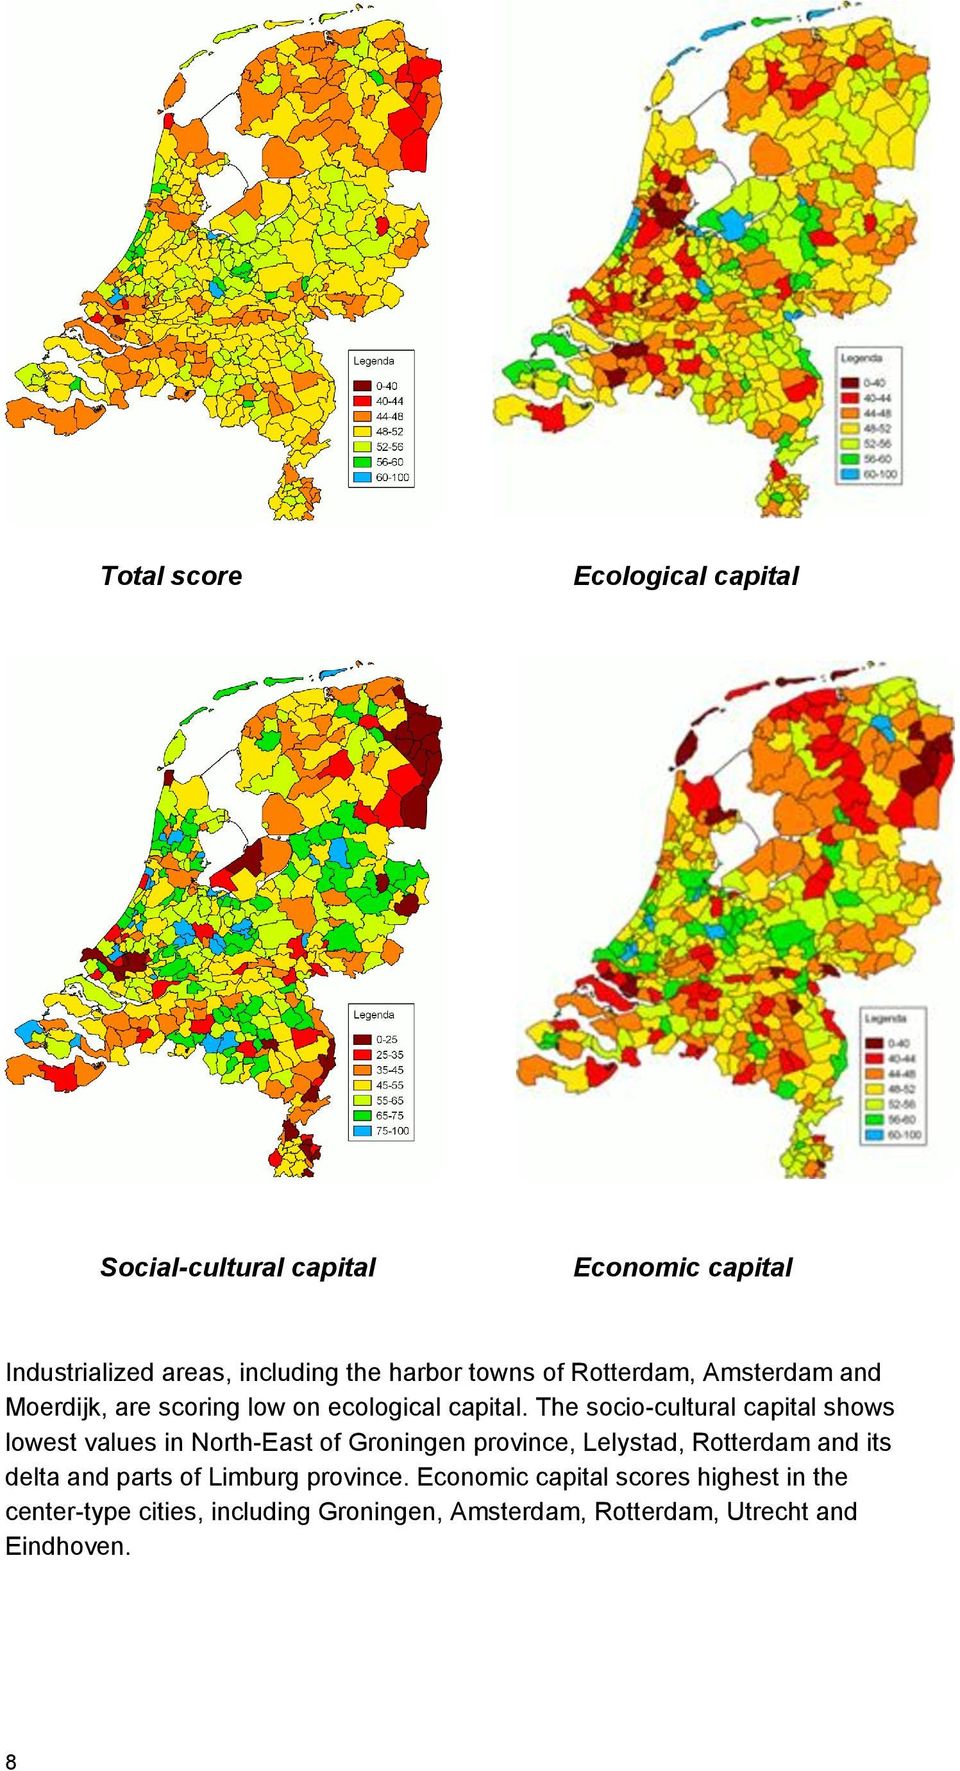 The socio-cultural capital shows lowest values in North-East of Groningen province, Lelystad, Rotterdam and its delta